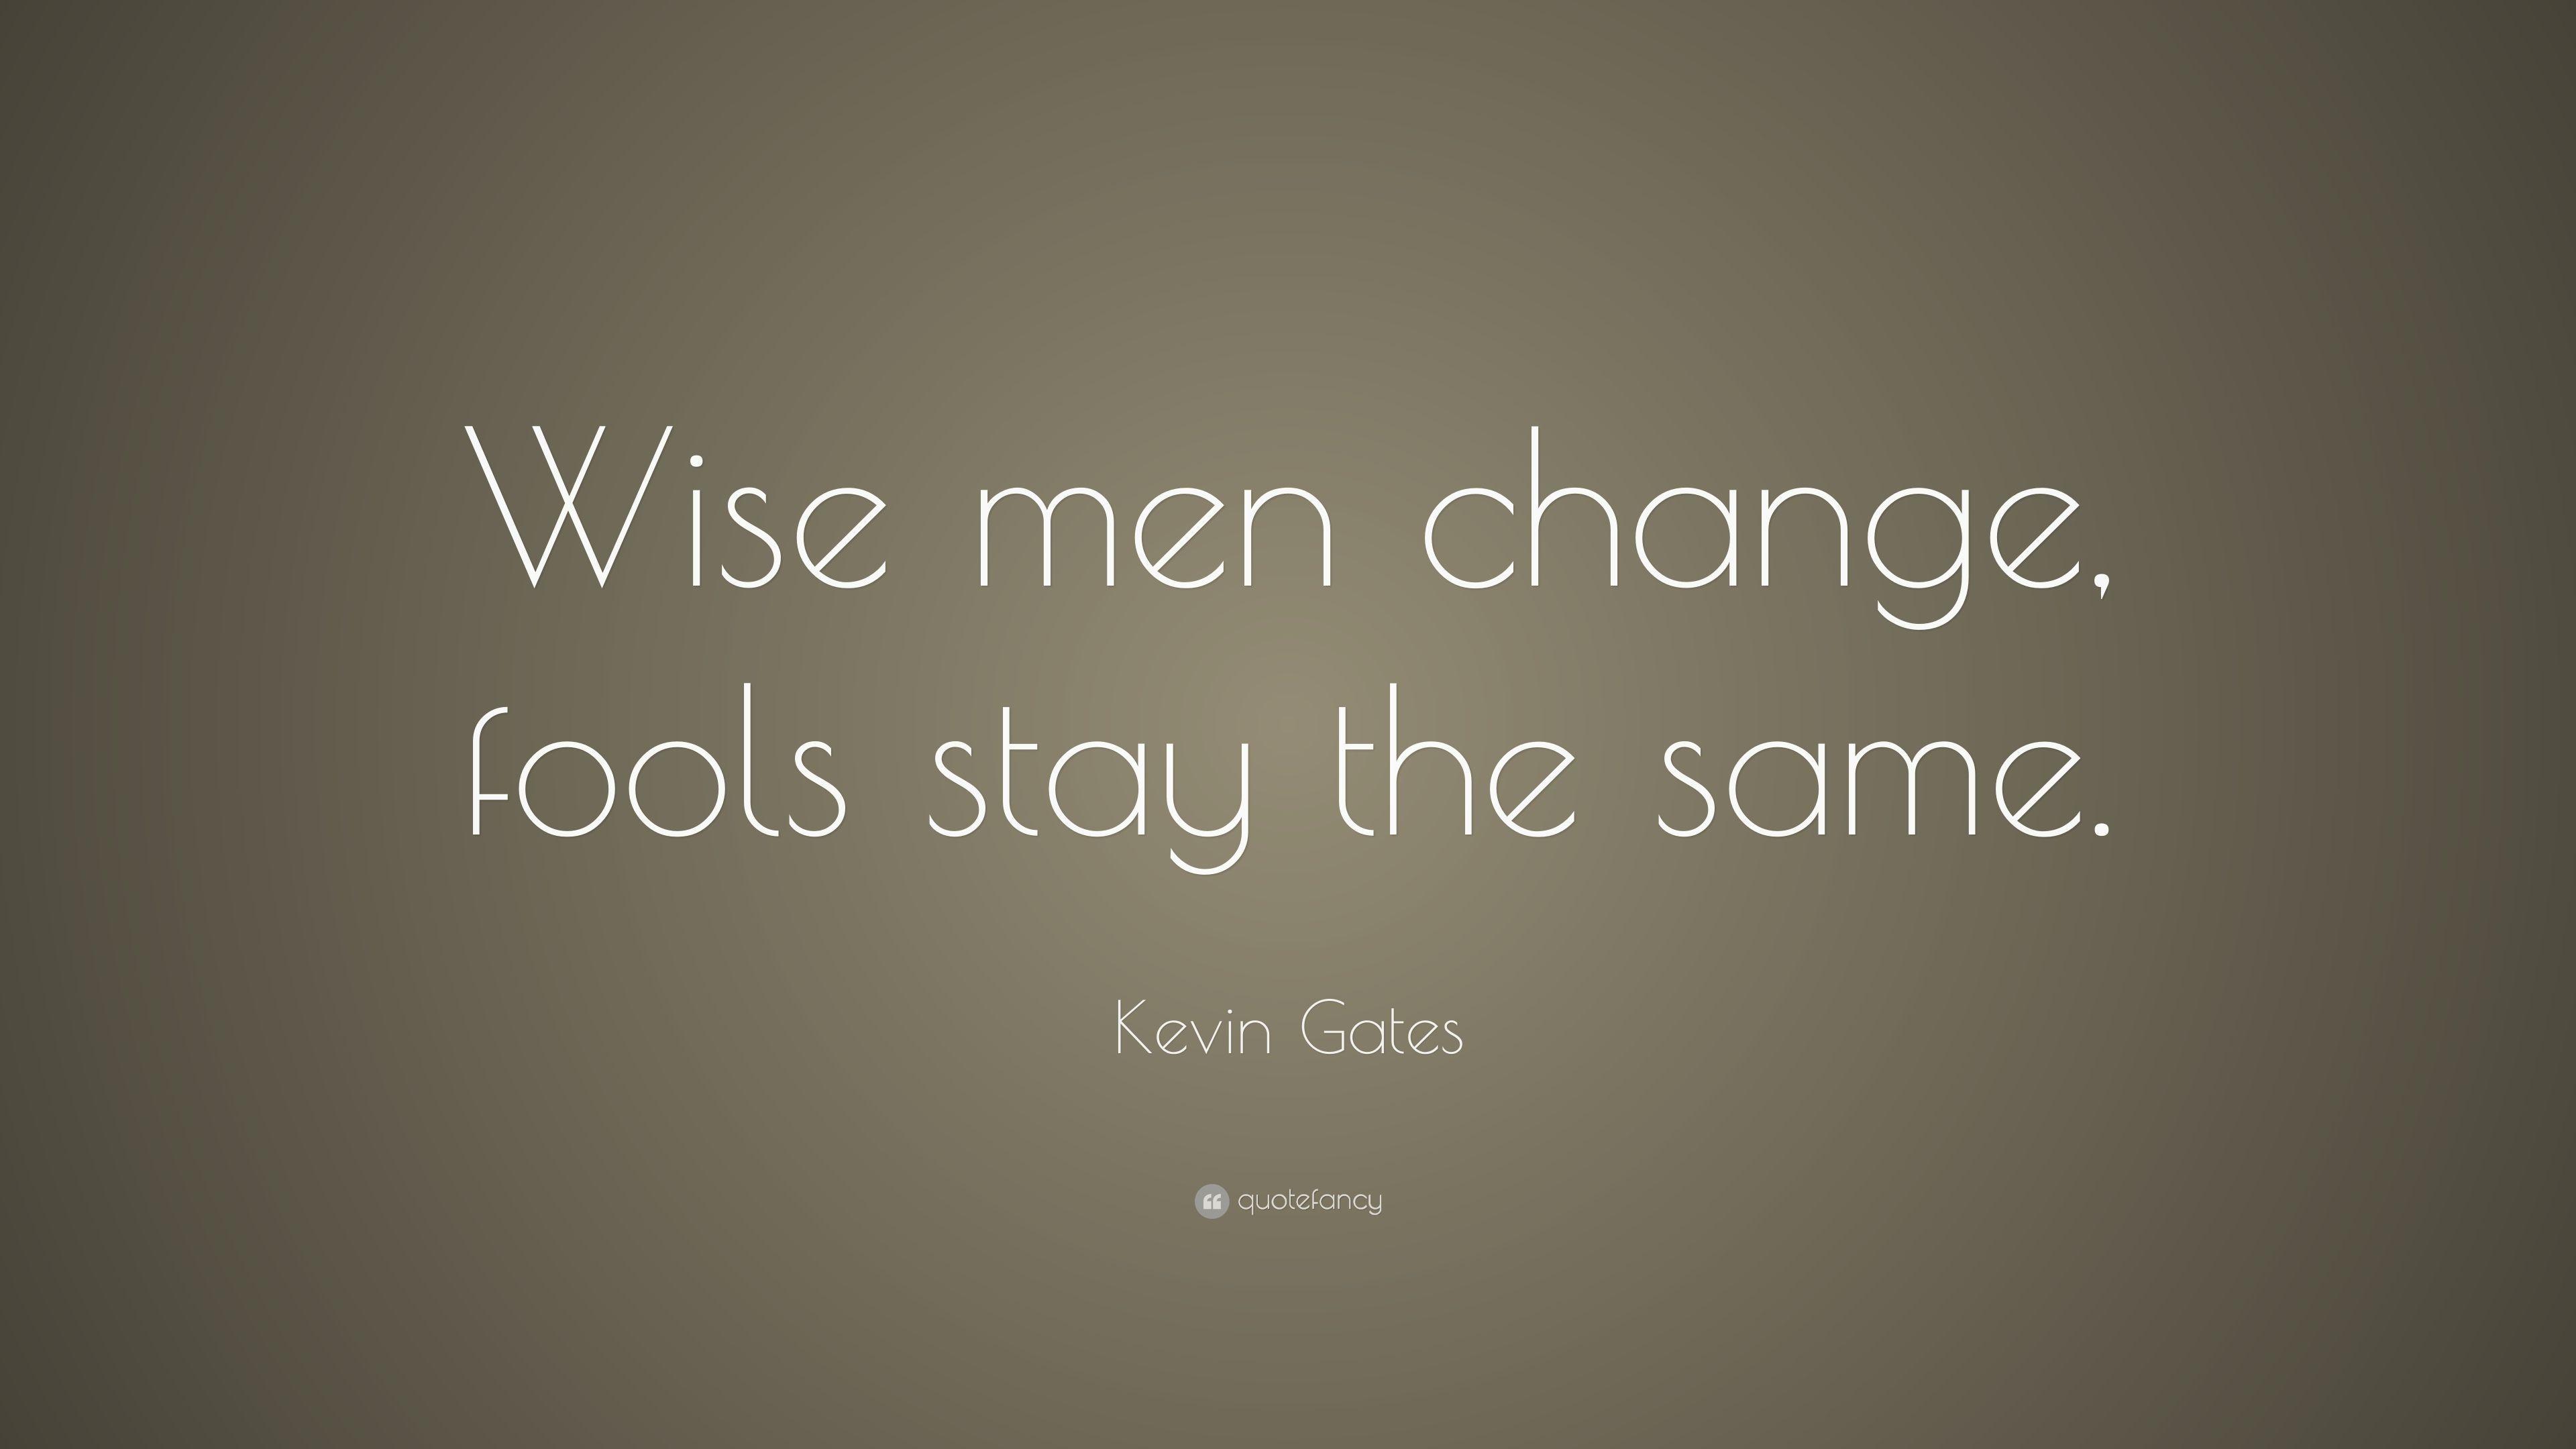 Kevin Gates Quote: “Wise men change, fools stay the same.” 17